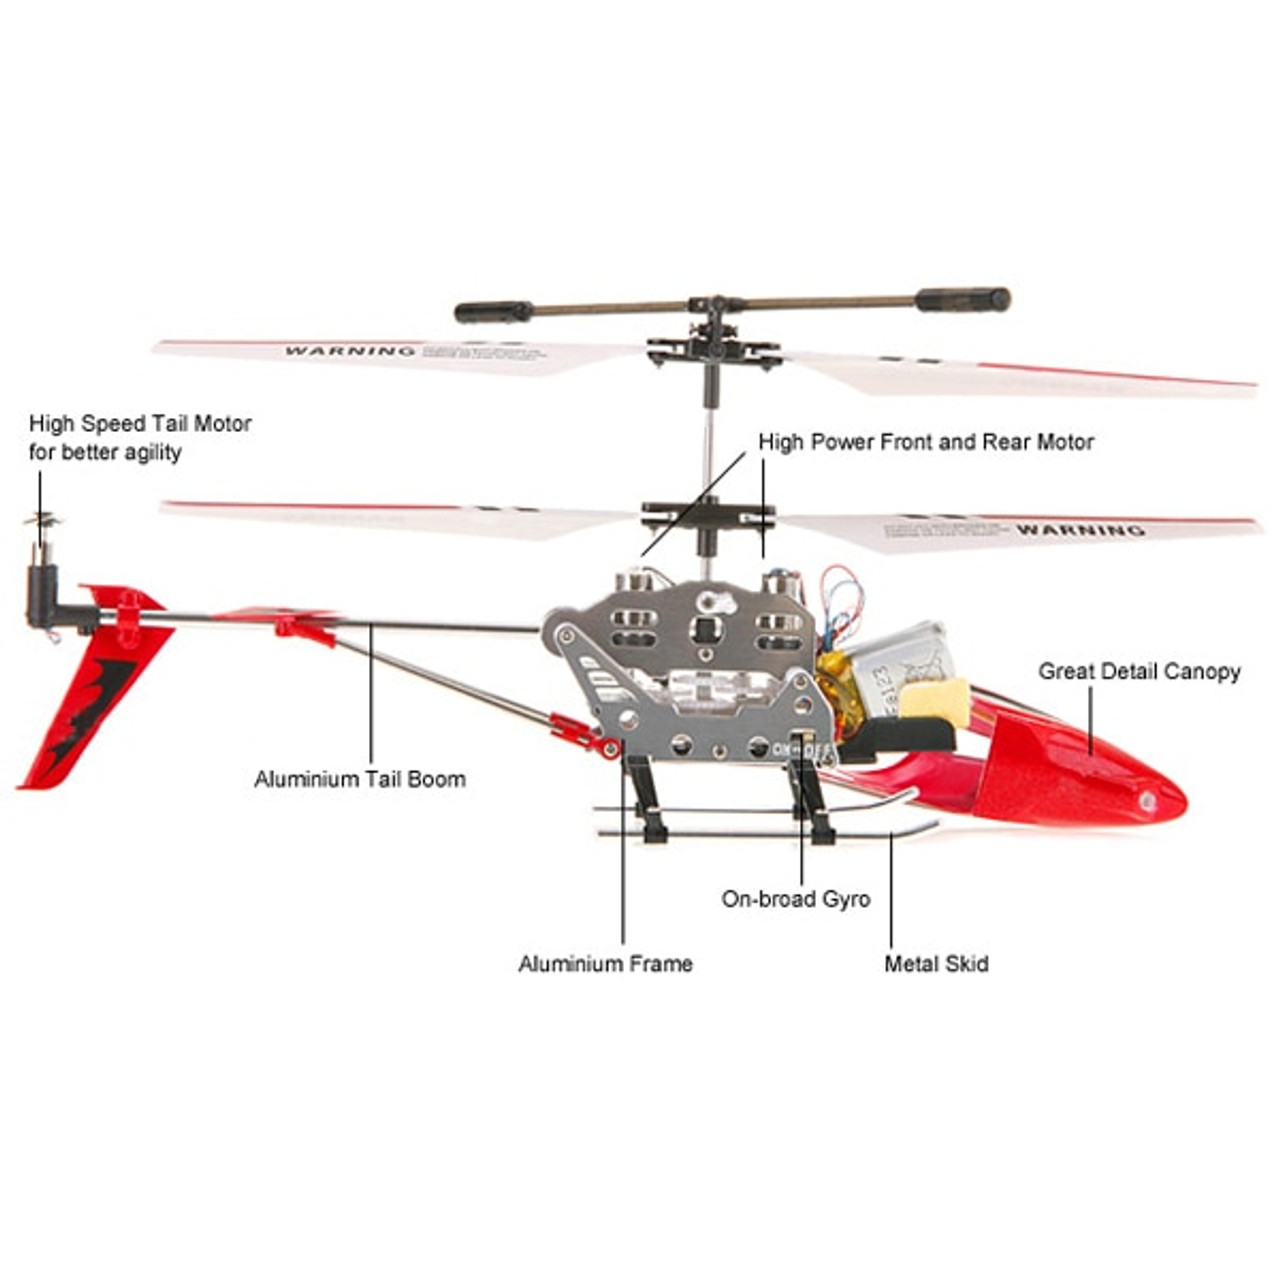 s107 metal series helicopter